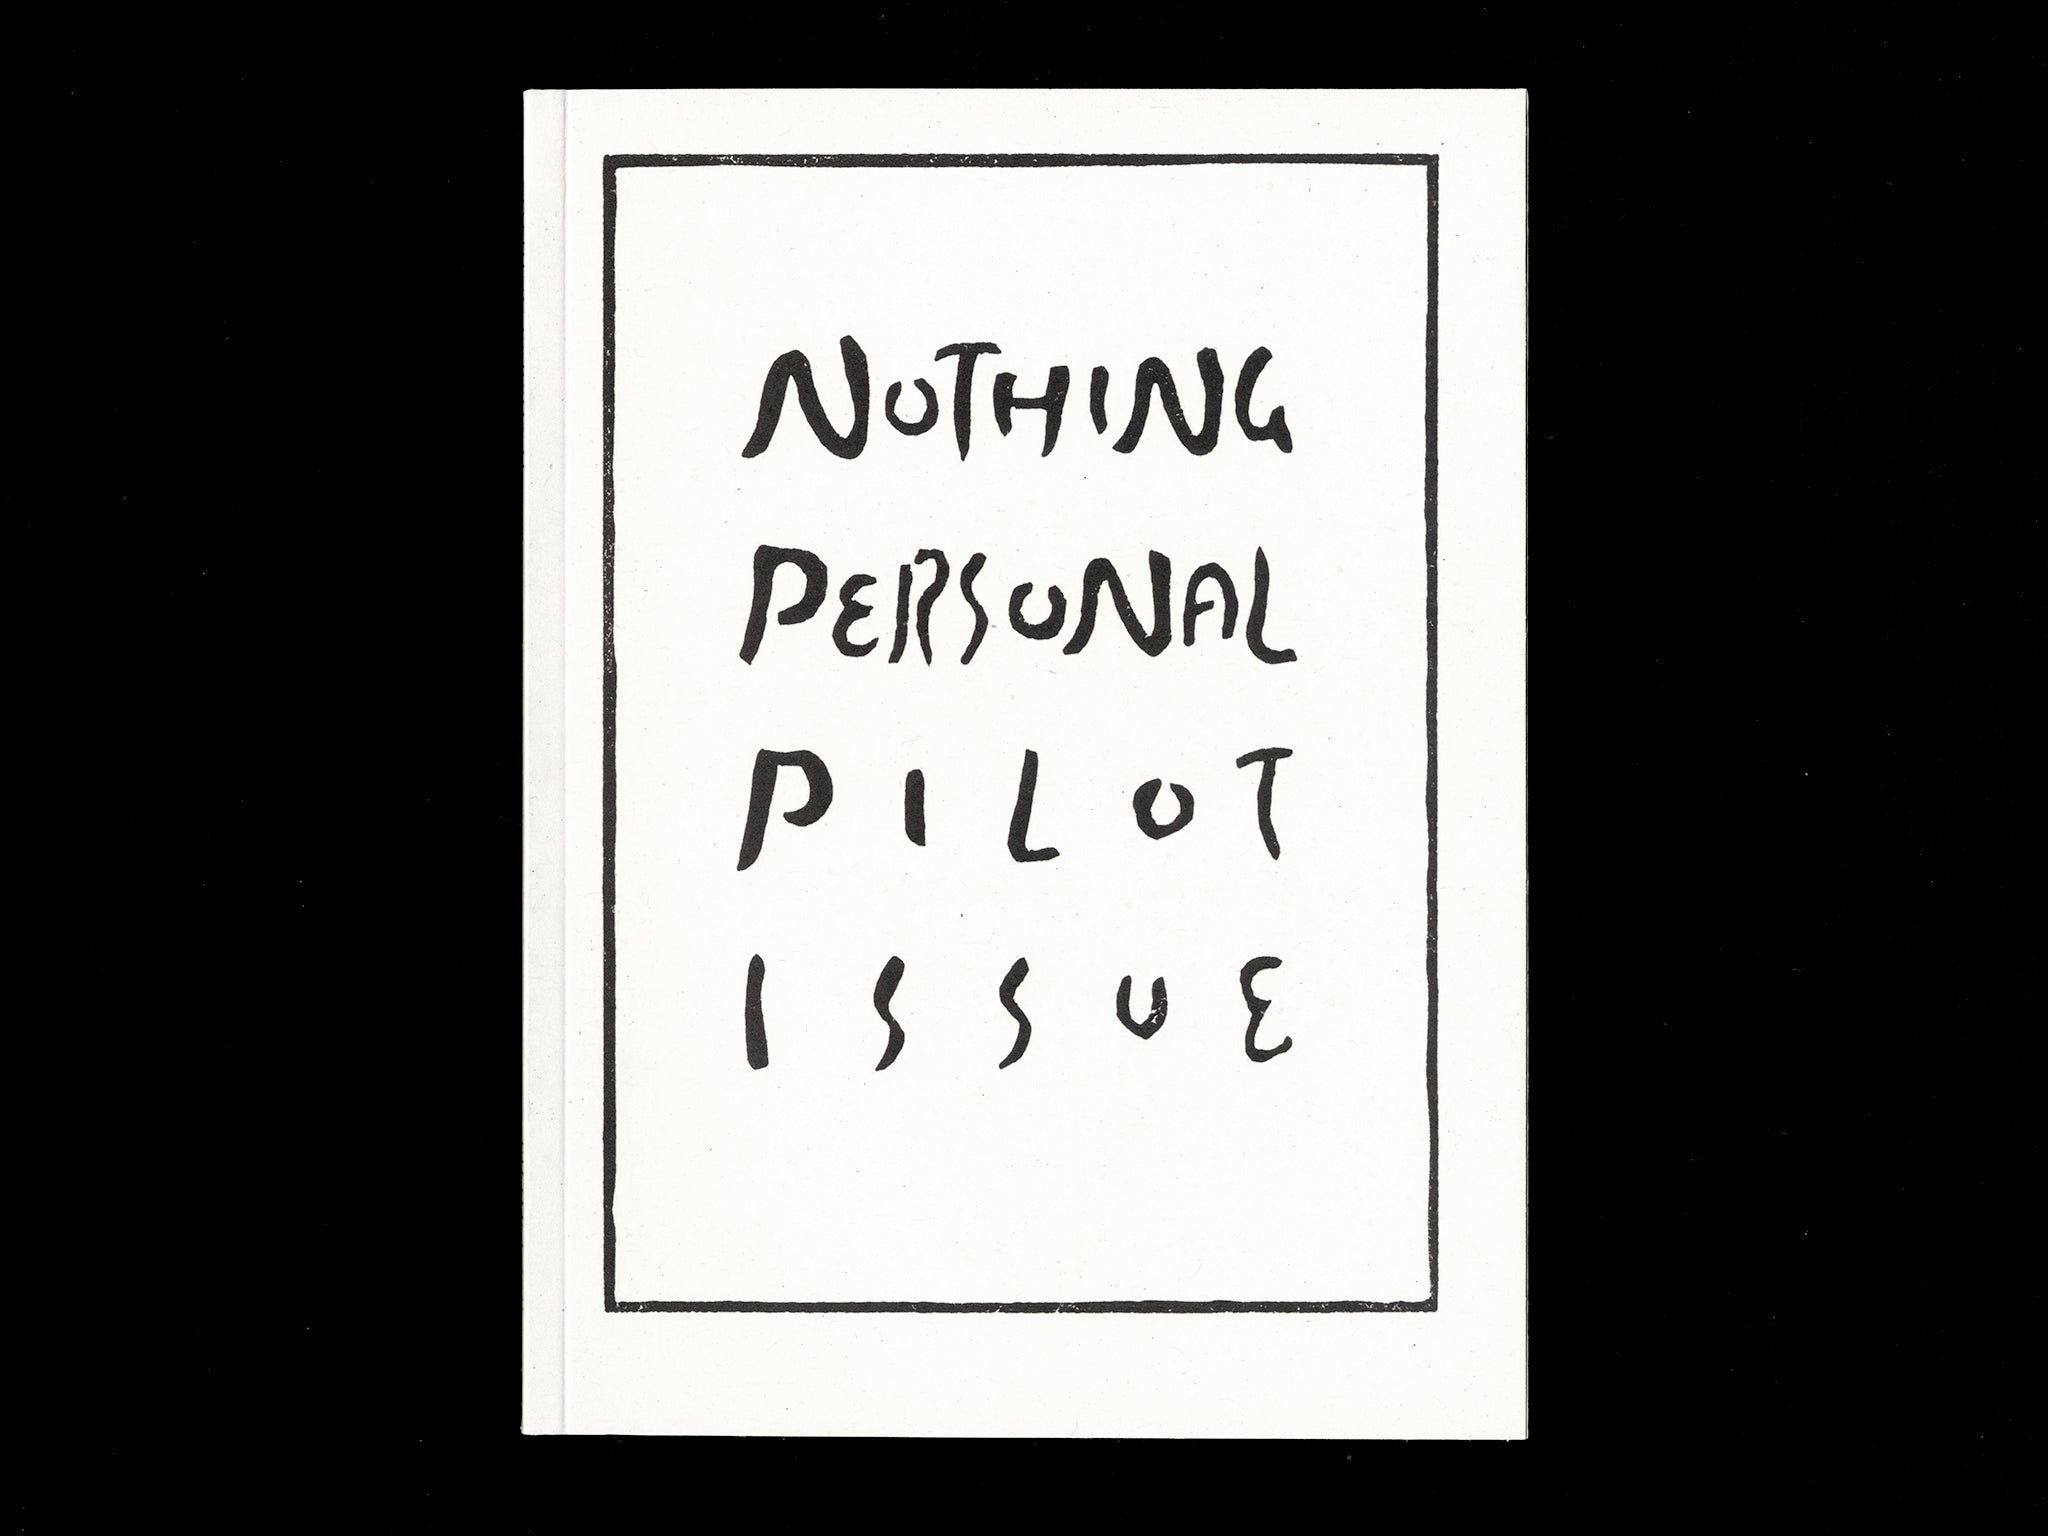 NOTHING PERSONAL: PILOT ISSUE